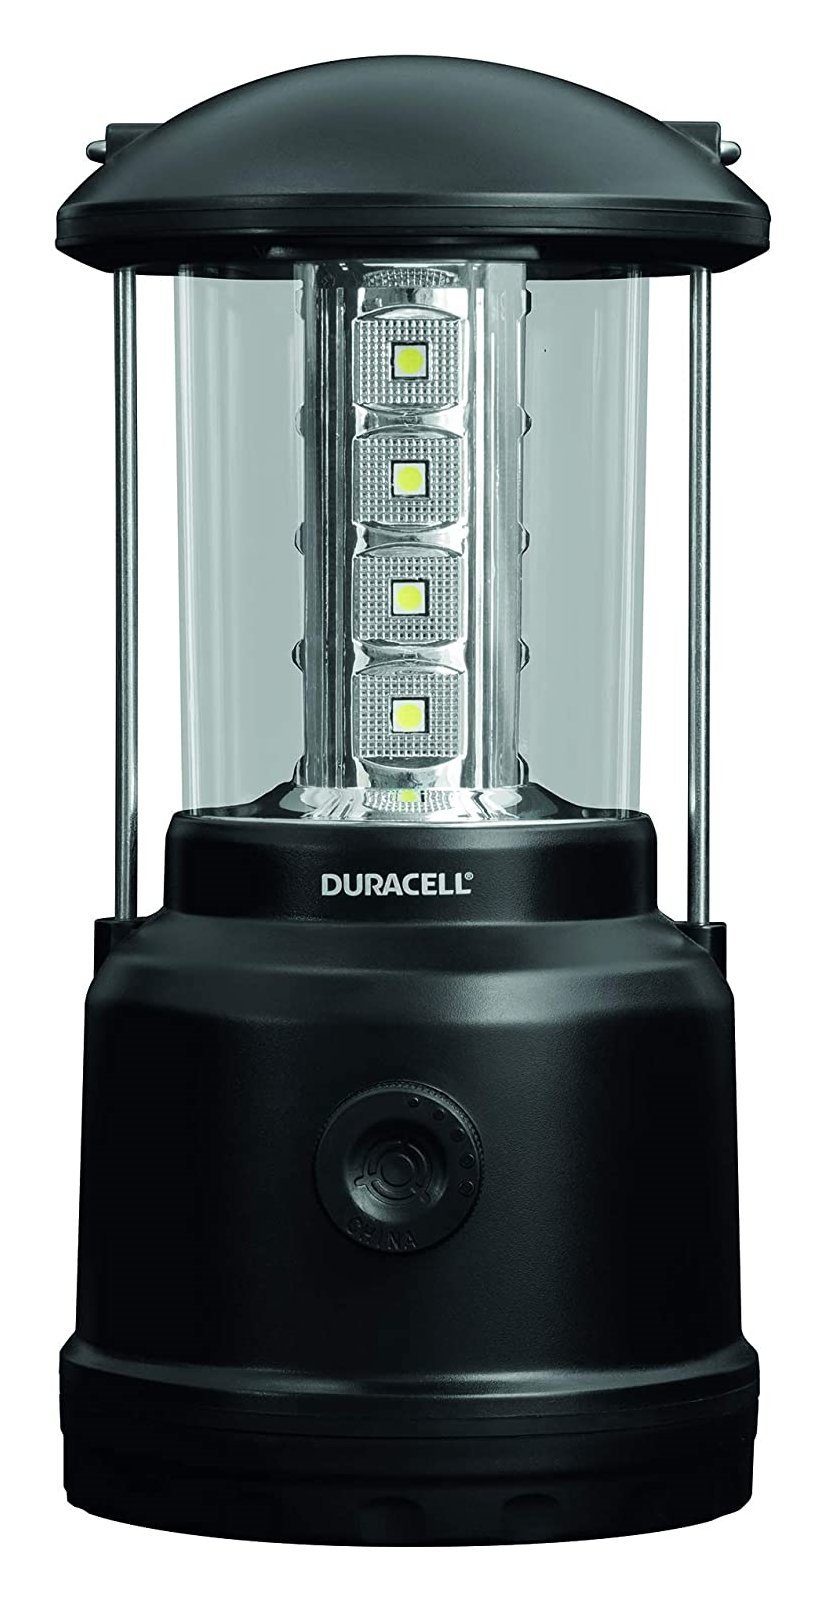 Duracell LED Laterne, Duracell LED Camping Laterne Explorer LNT-200  Taschenlampe dimmbar Lampe Outdoor